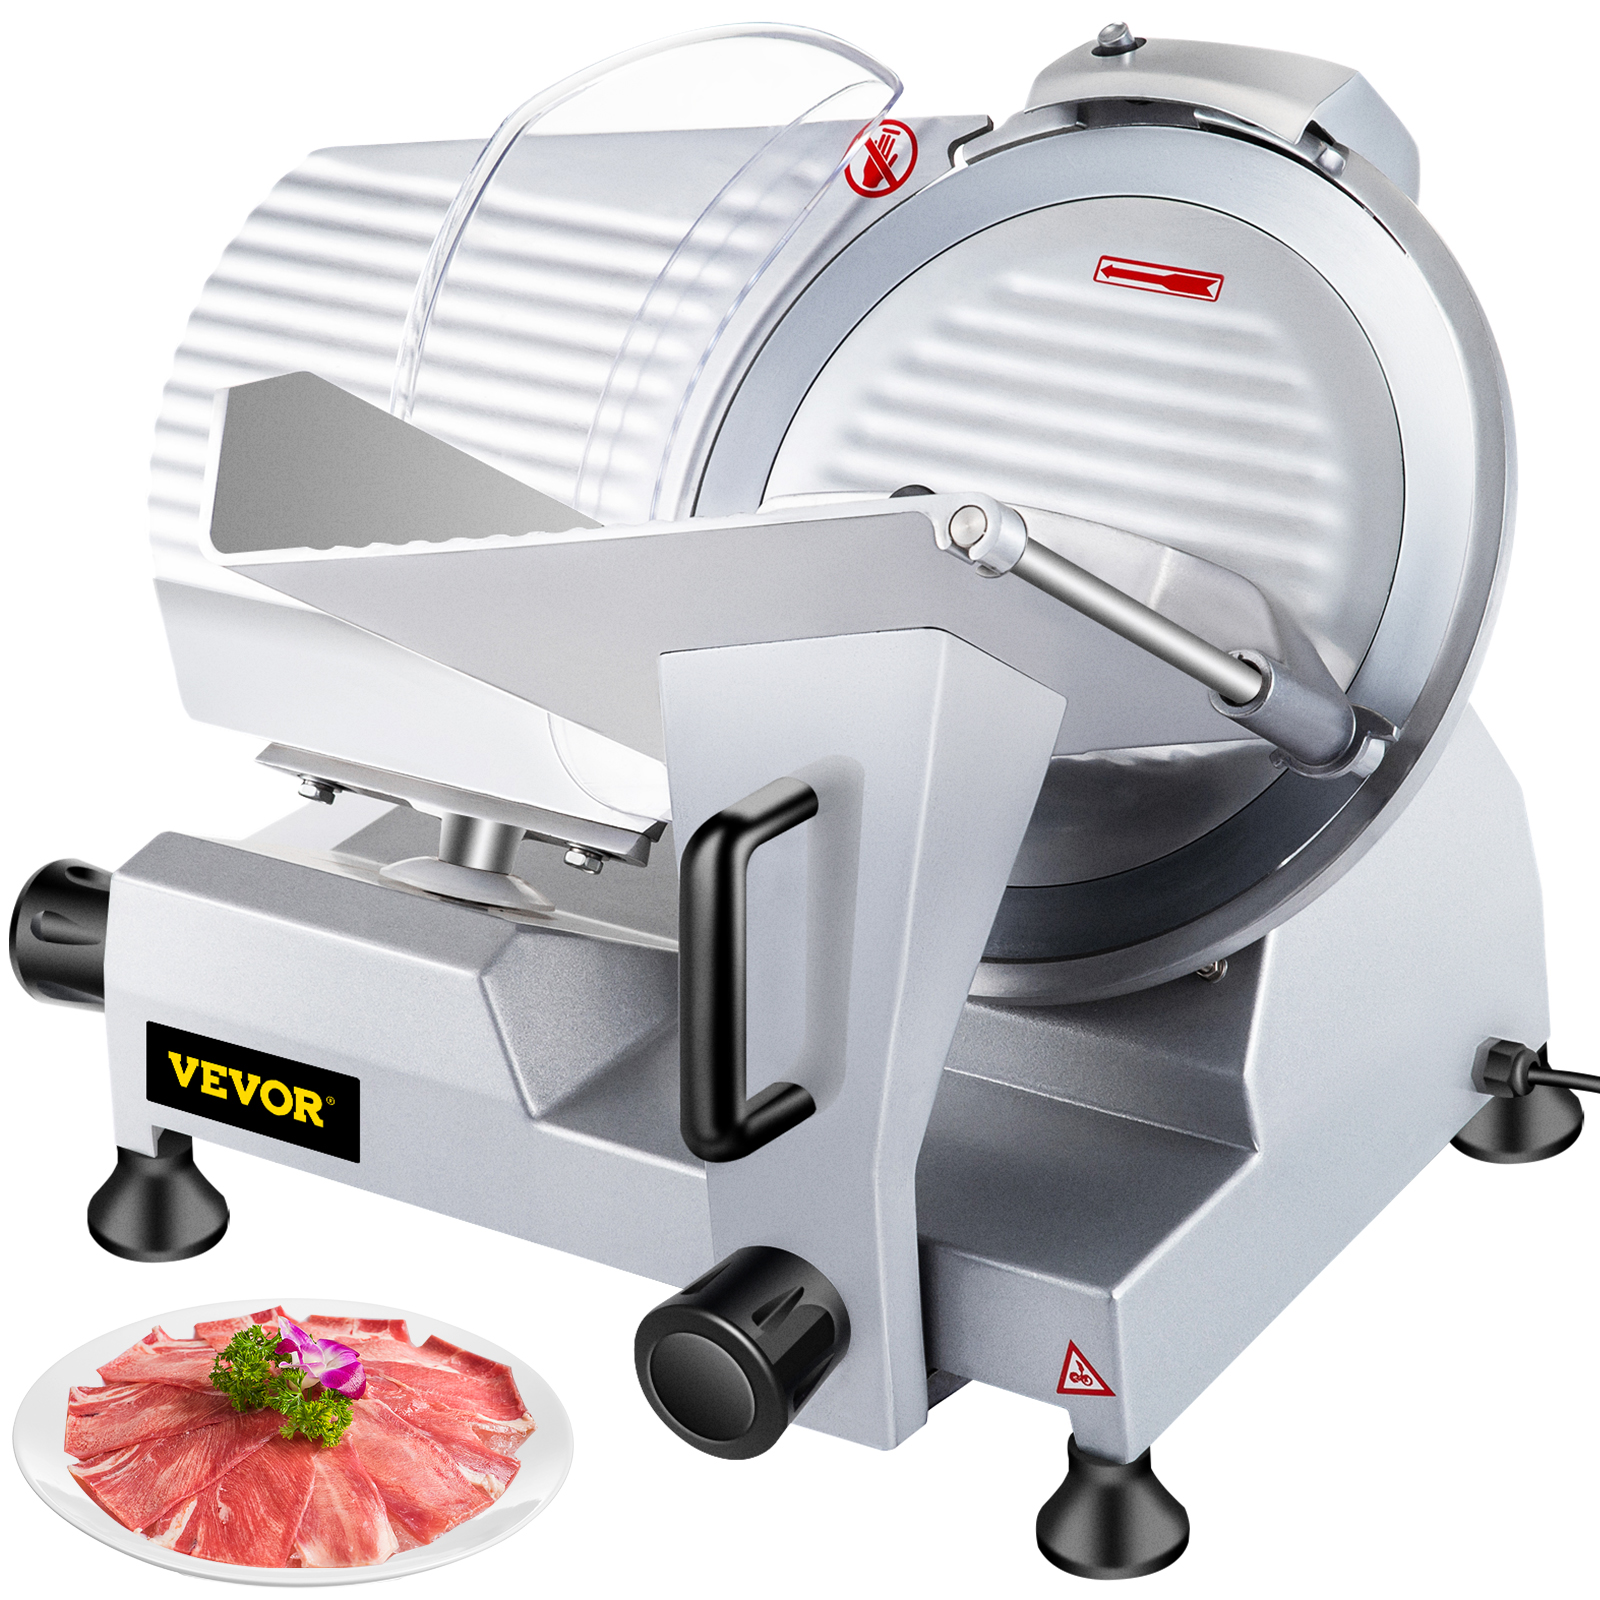 VEVOR Commercial Meat Slicer,12 inch Electric Meat Slicer Semi-Auto 420W Premium Carbon Steel Blade Adjustable Thickness, Deli Meat Cheese Food Slicer от Vevor Many GEOs